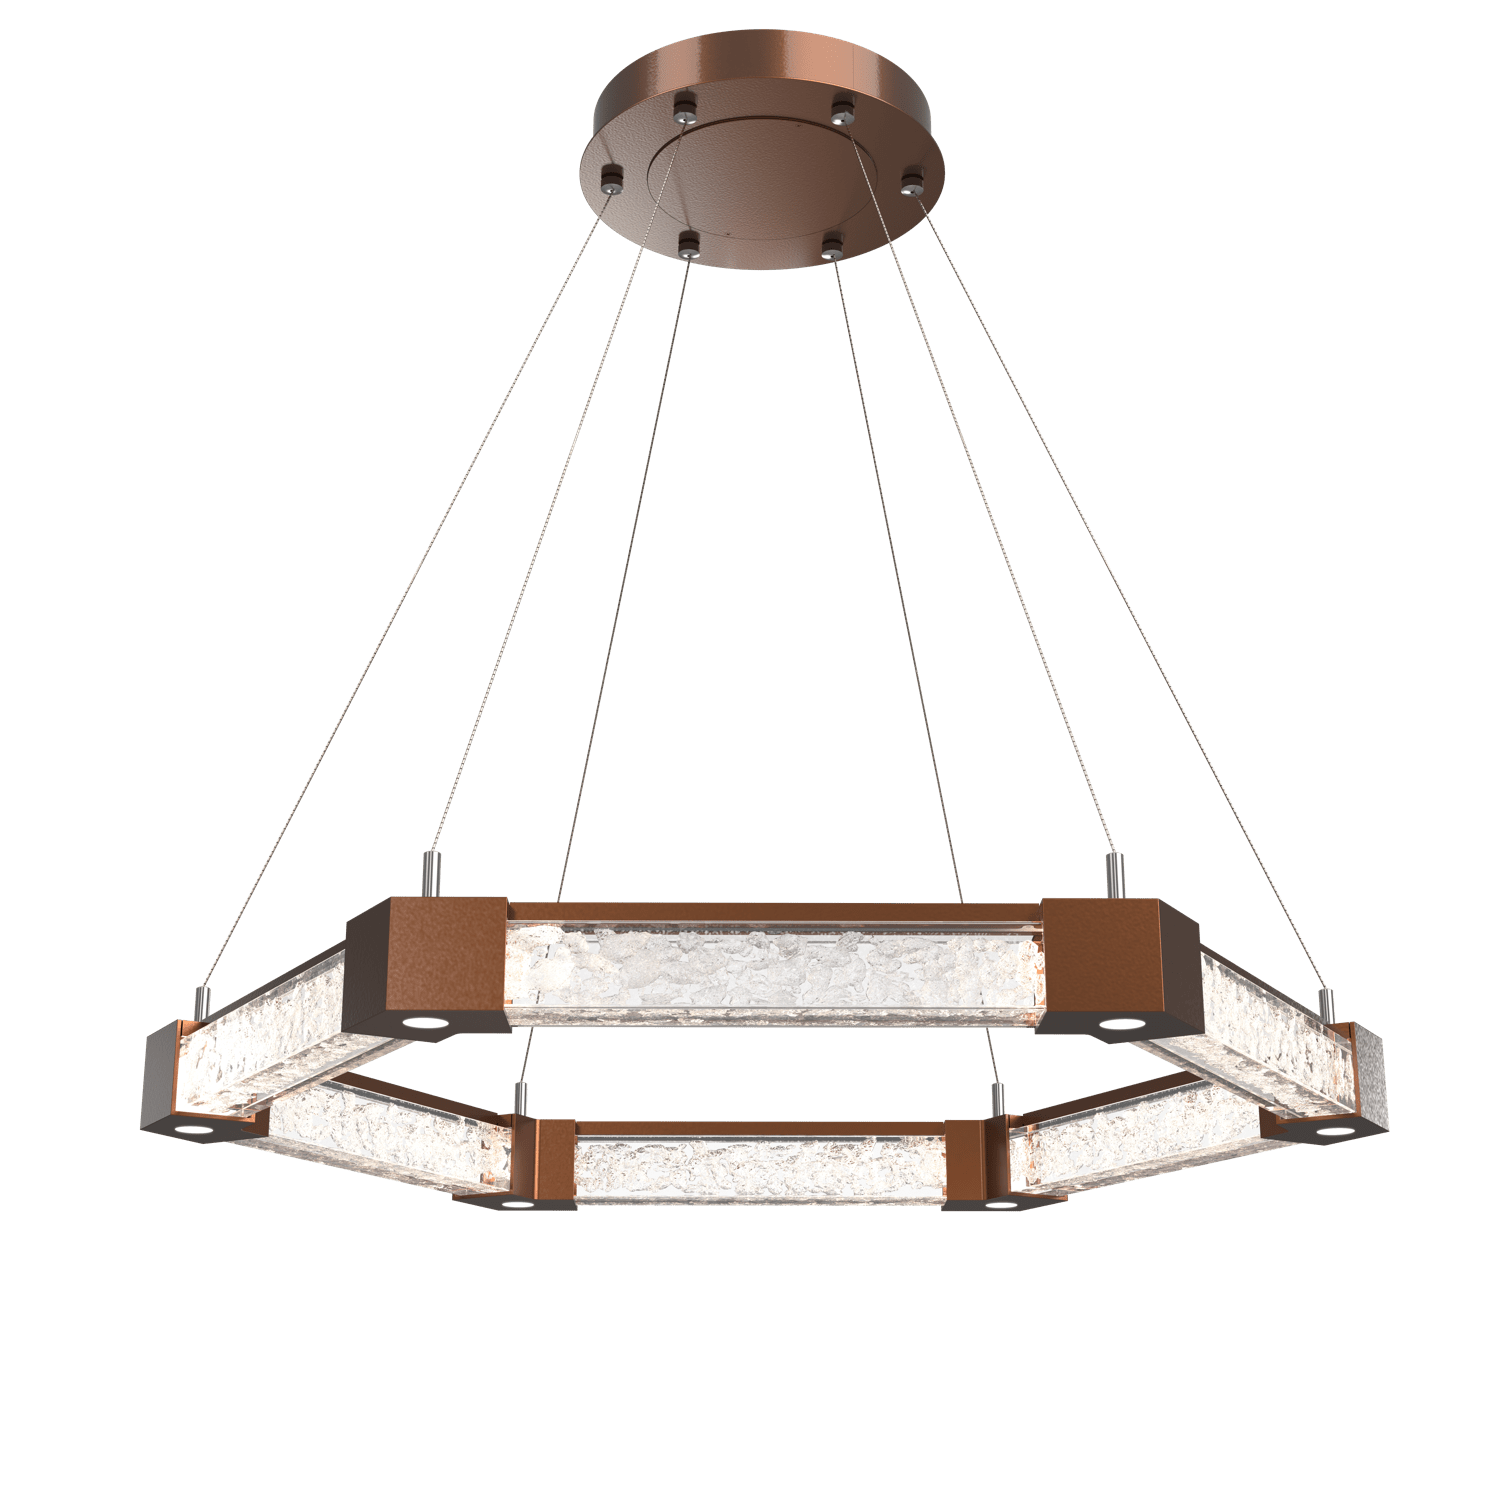 CHB0060-35-BB-GC-Hammerton-Studio-Axis-Hexagonal-Ring-Chandelier-with-Burnished-Bronze-finish-and-clear-cast-glass-and-LED-lamping